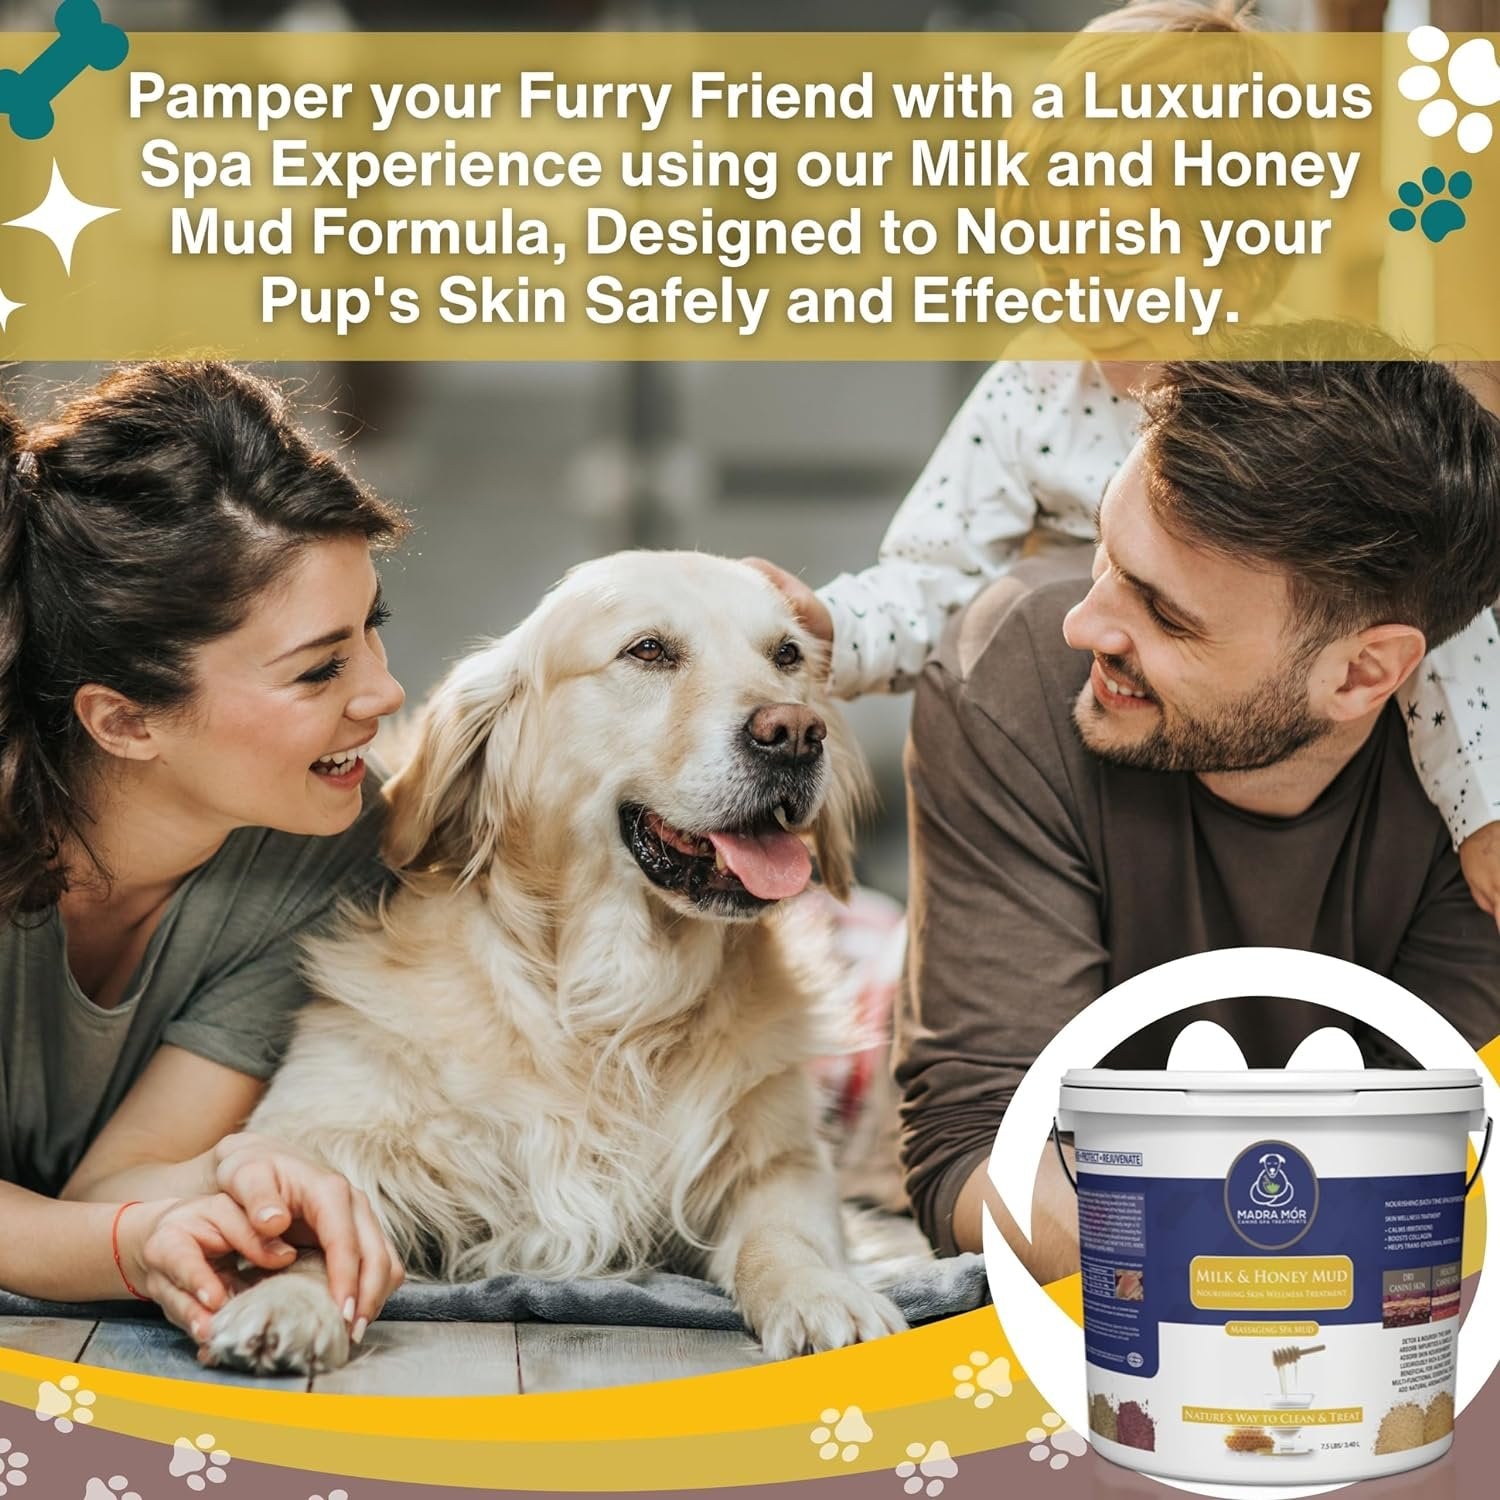 Madra Mor - Milk & Honey Mud Massaging Spa Bath for Dogs - Skin Care, Grooming - 1 Pack of 7.5 lb (3.4L) - with Multi-Purpose Key Chain